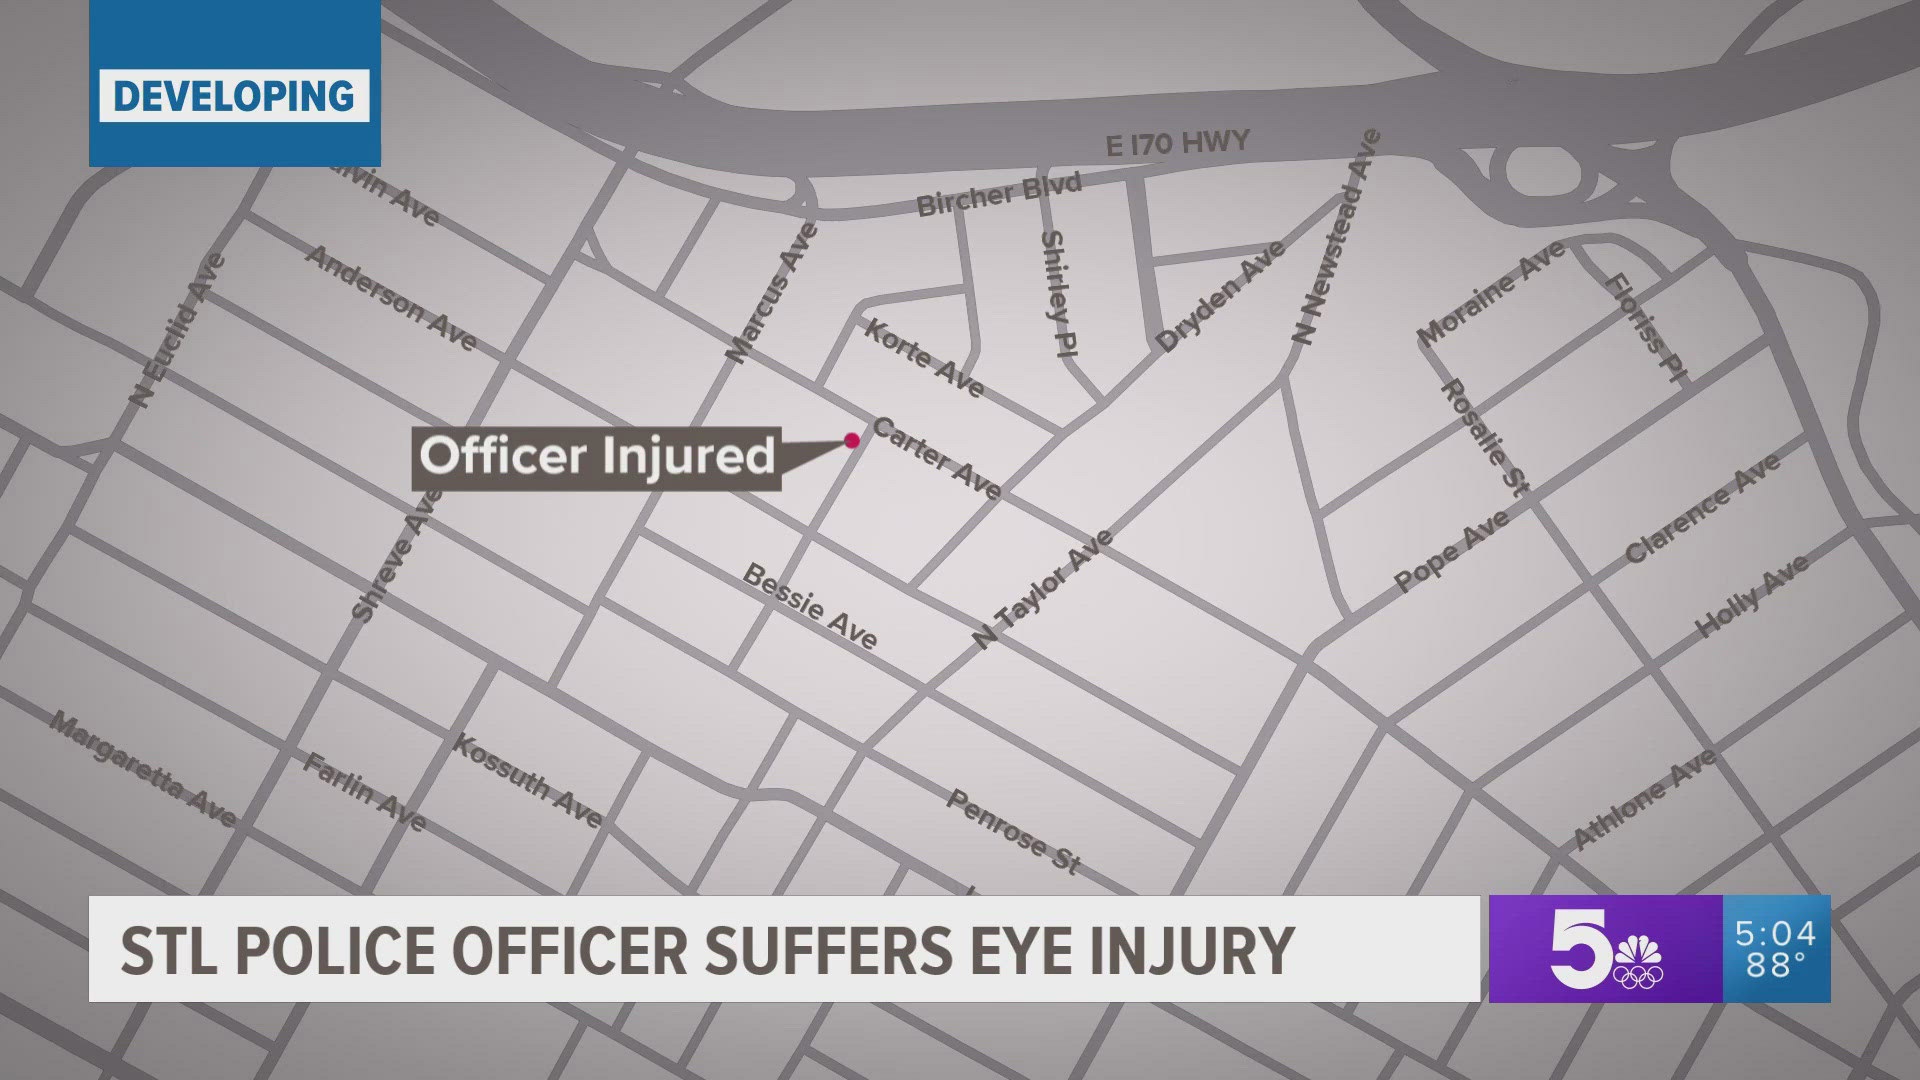 The 55-year-old officer suffered a serious injury to his left eye. St. Louis police did not provide an update on the officer's condition as of Saturday afternoon.